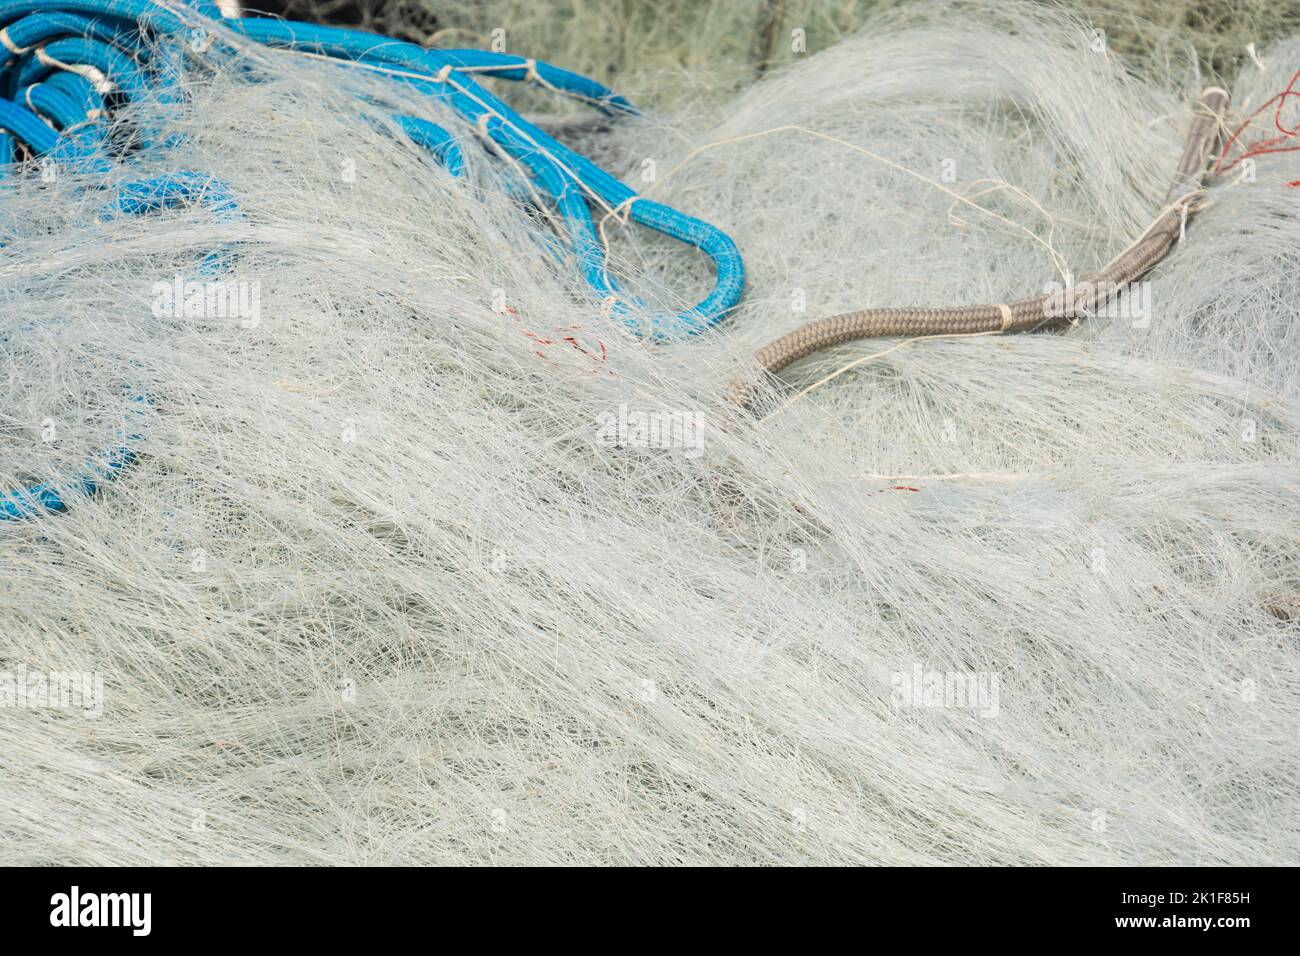 detail view of messy fine mesh fishing nets in a pile after use Stock Photo